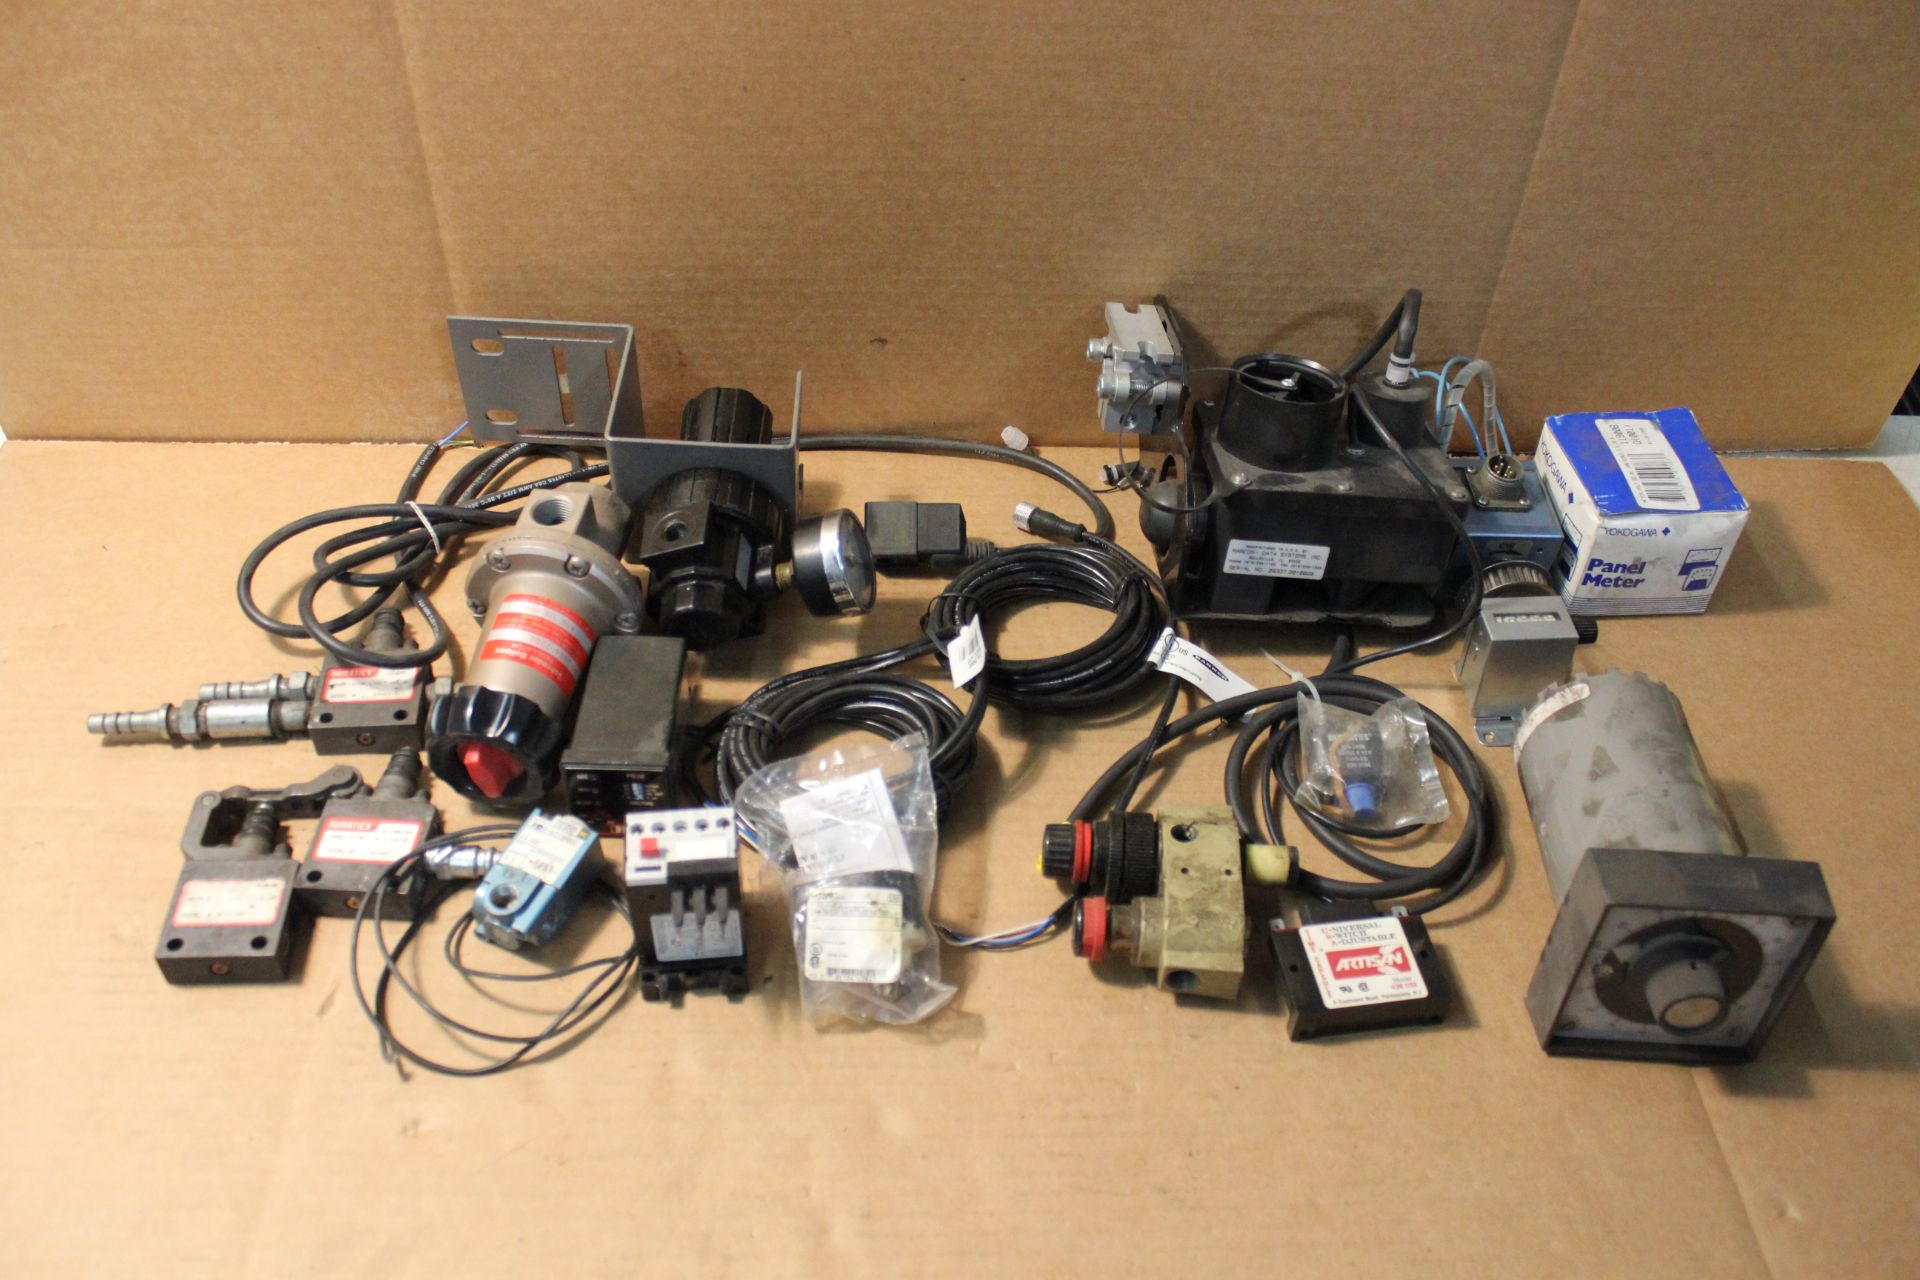 LOT OF MISCELLANEOUS INDUSTRIAL PARTS